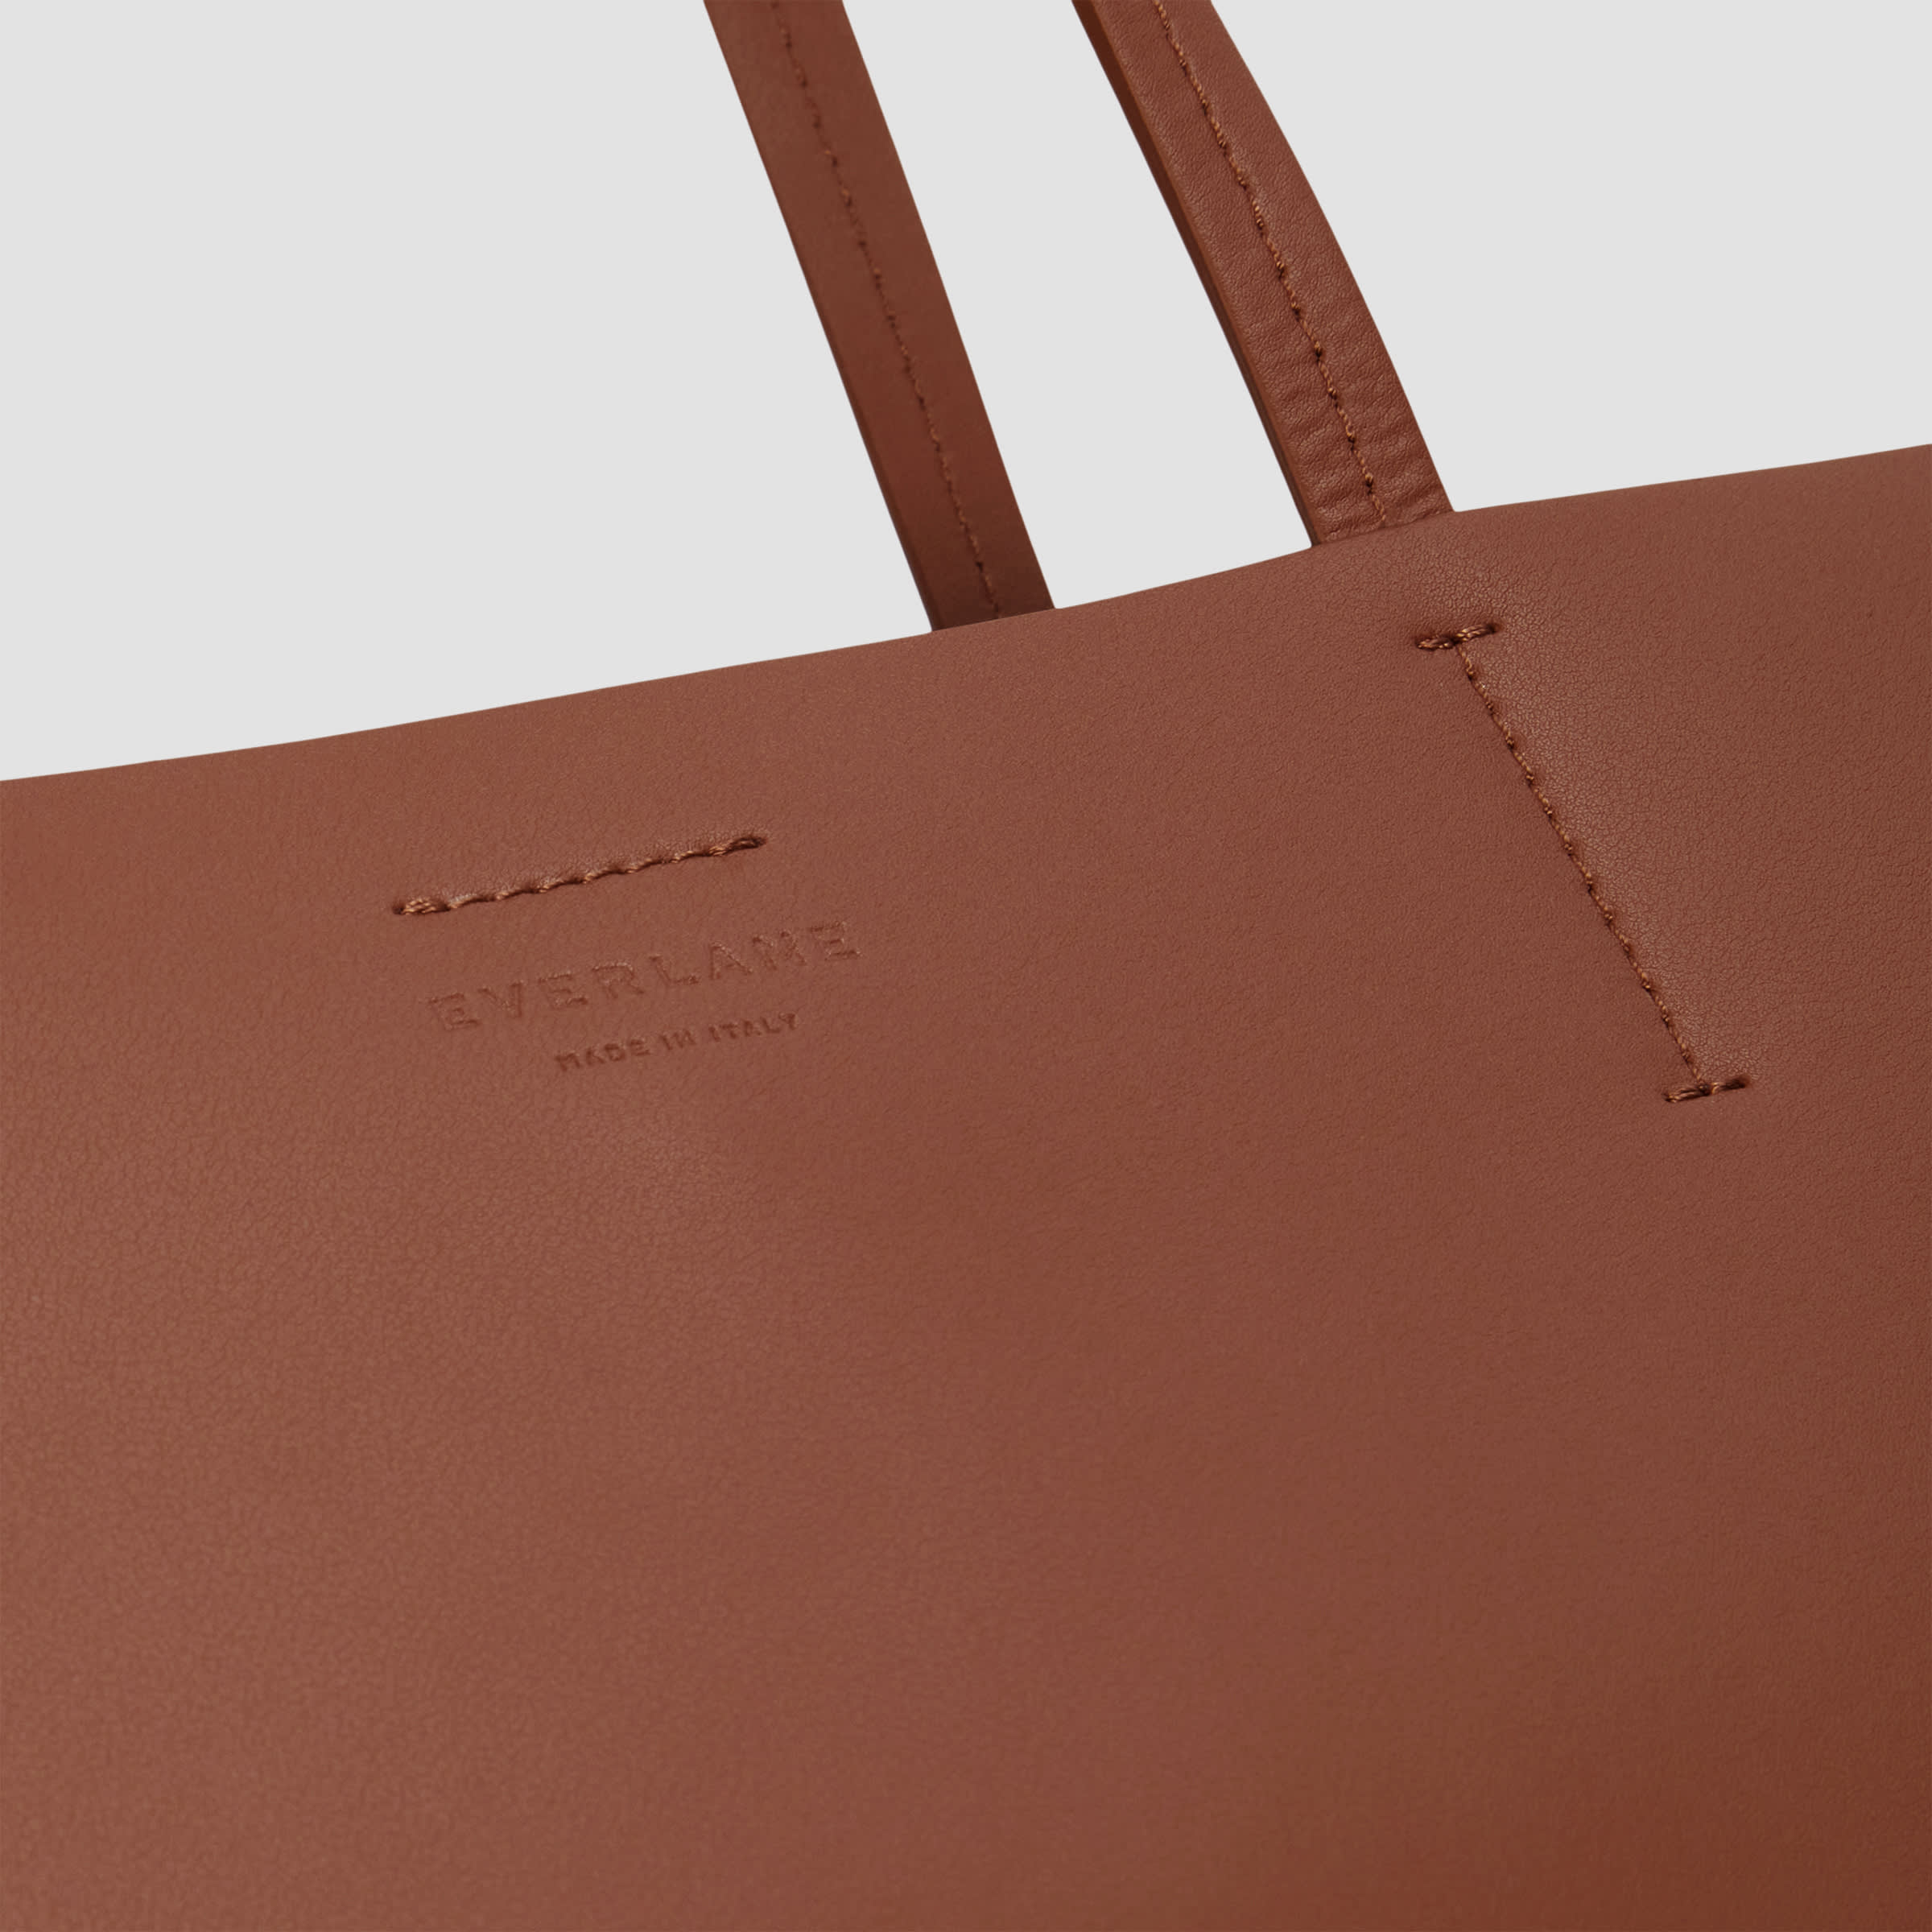 The Luxe Italian Leather Tote